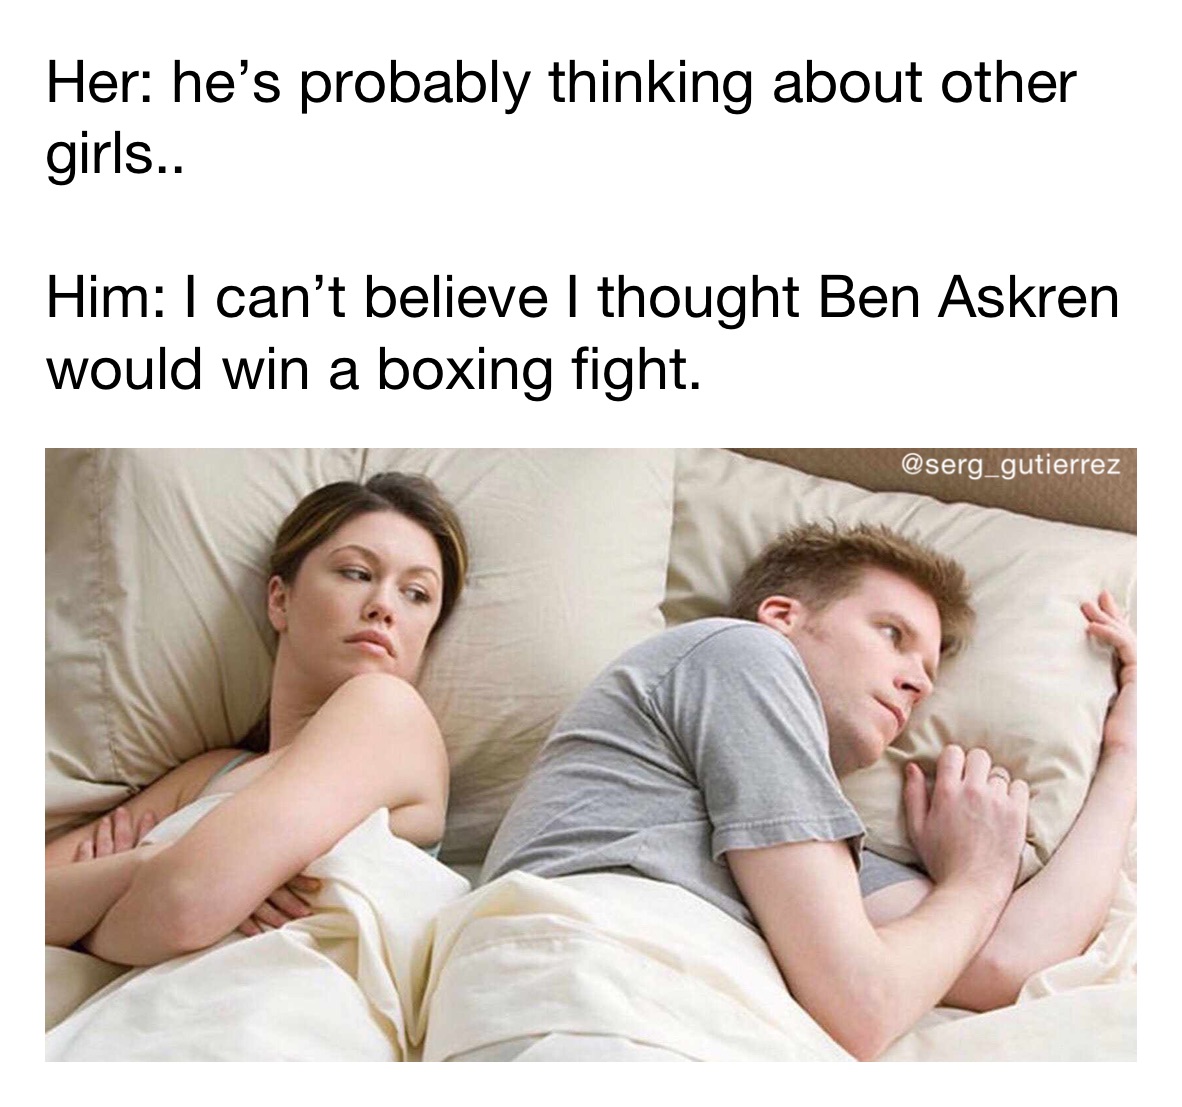 Her: he’s probably thinking about other girls..

Him: I can’t believe I thought Ben Askren would win a boxing fight.